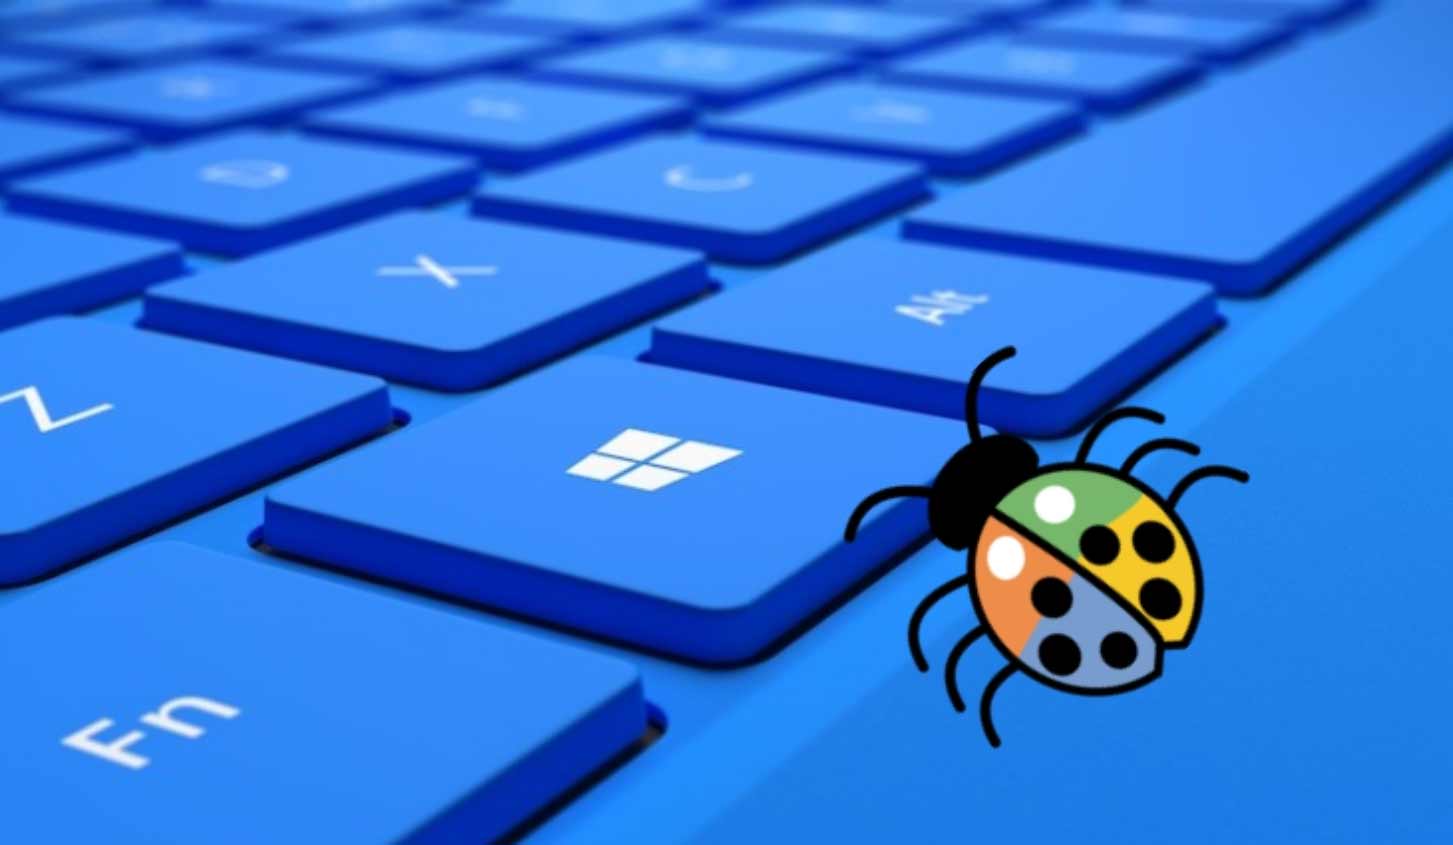 Microsoft Launches Bing AI bug Bounty Program With Rewards from $2,000 to $15,000